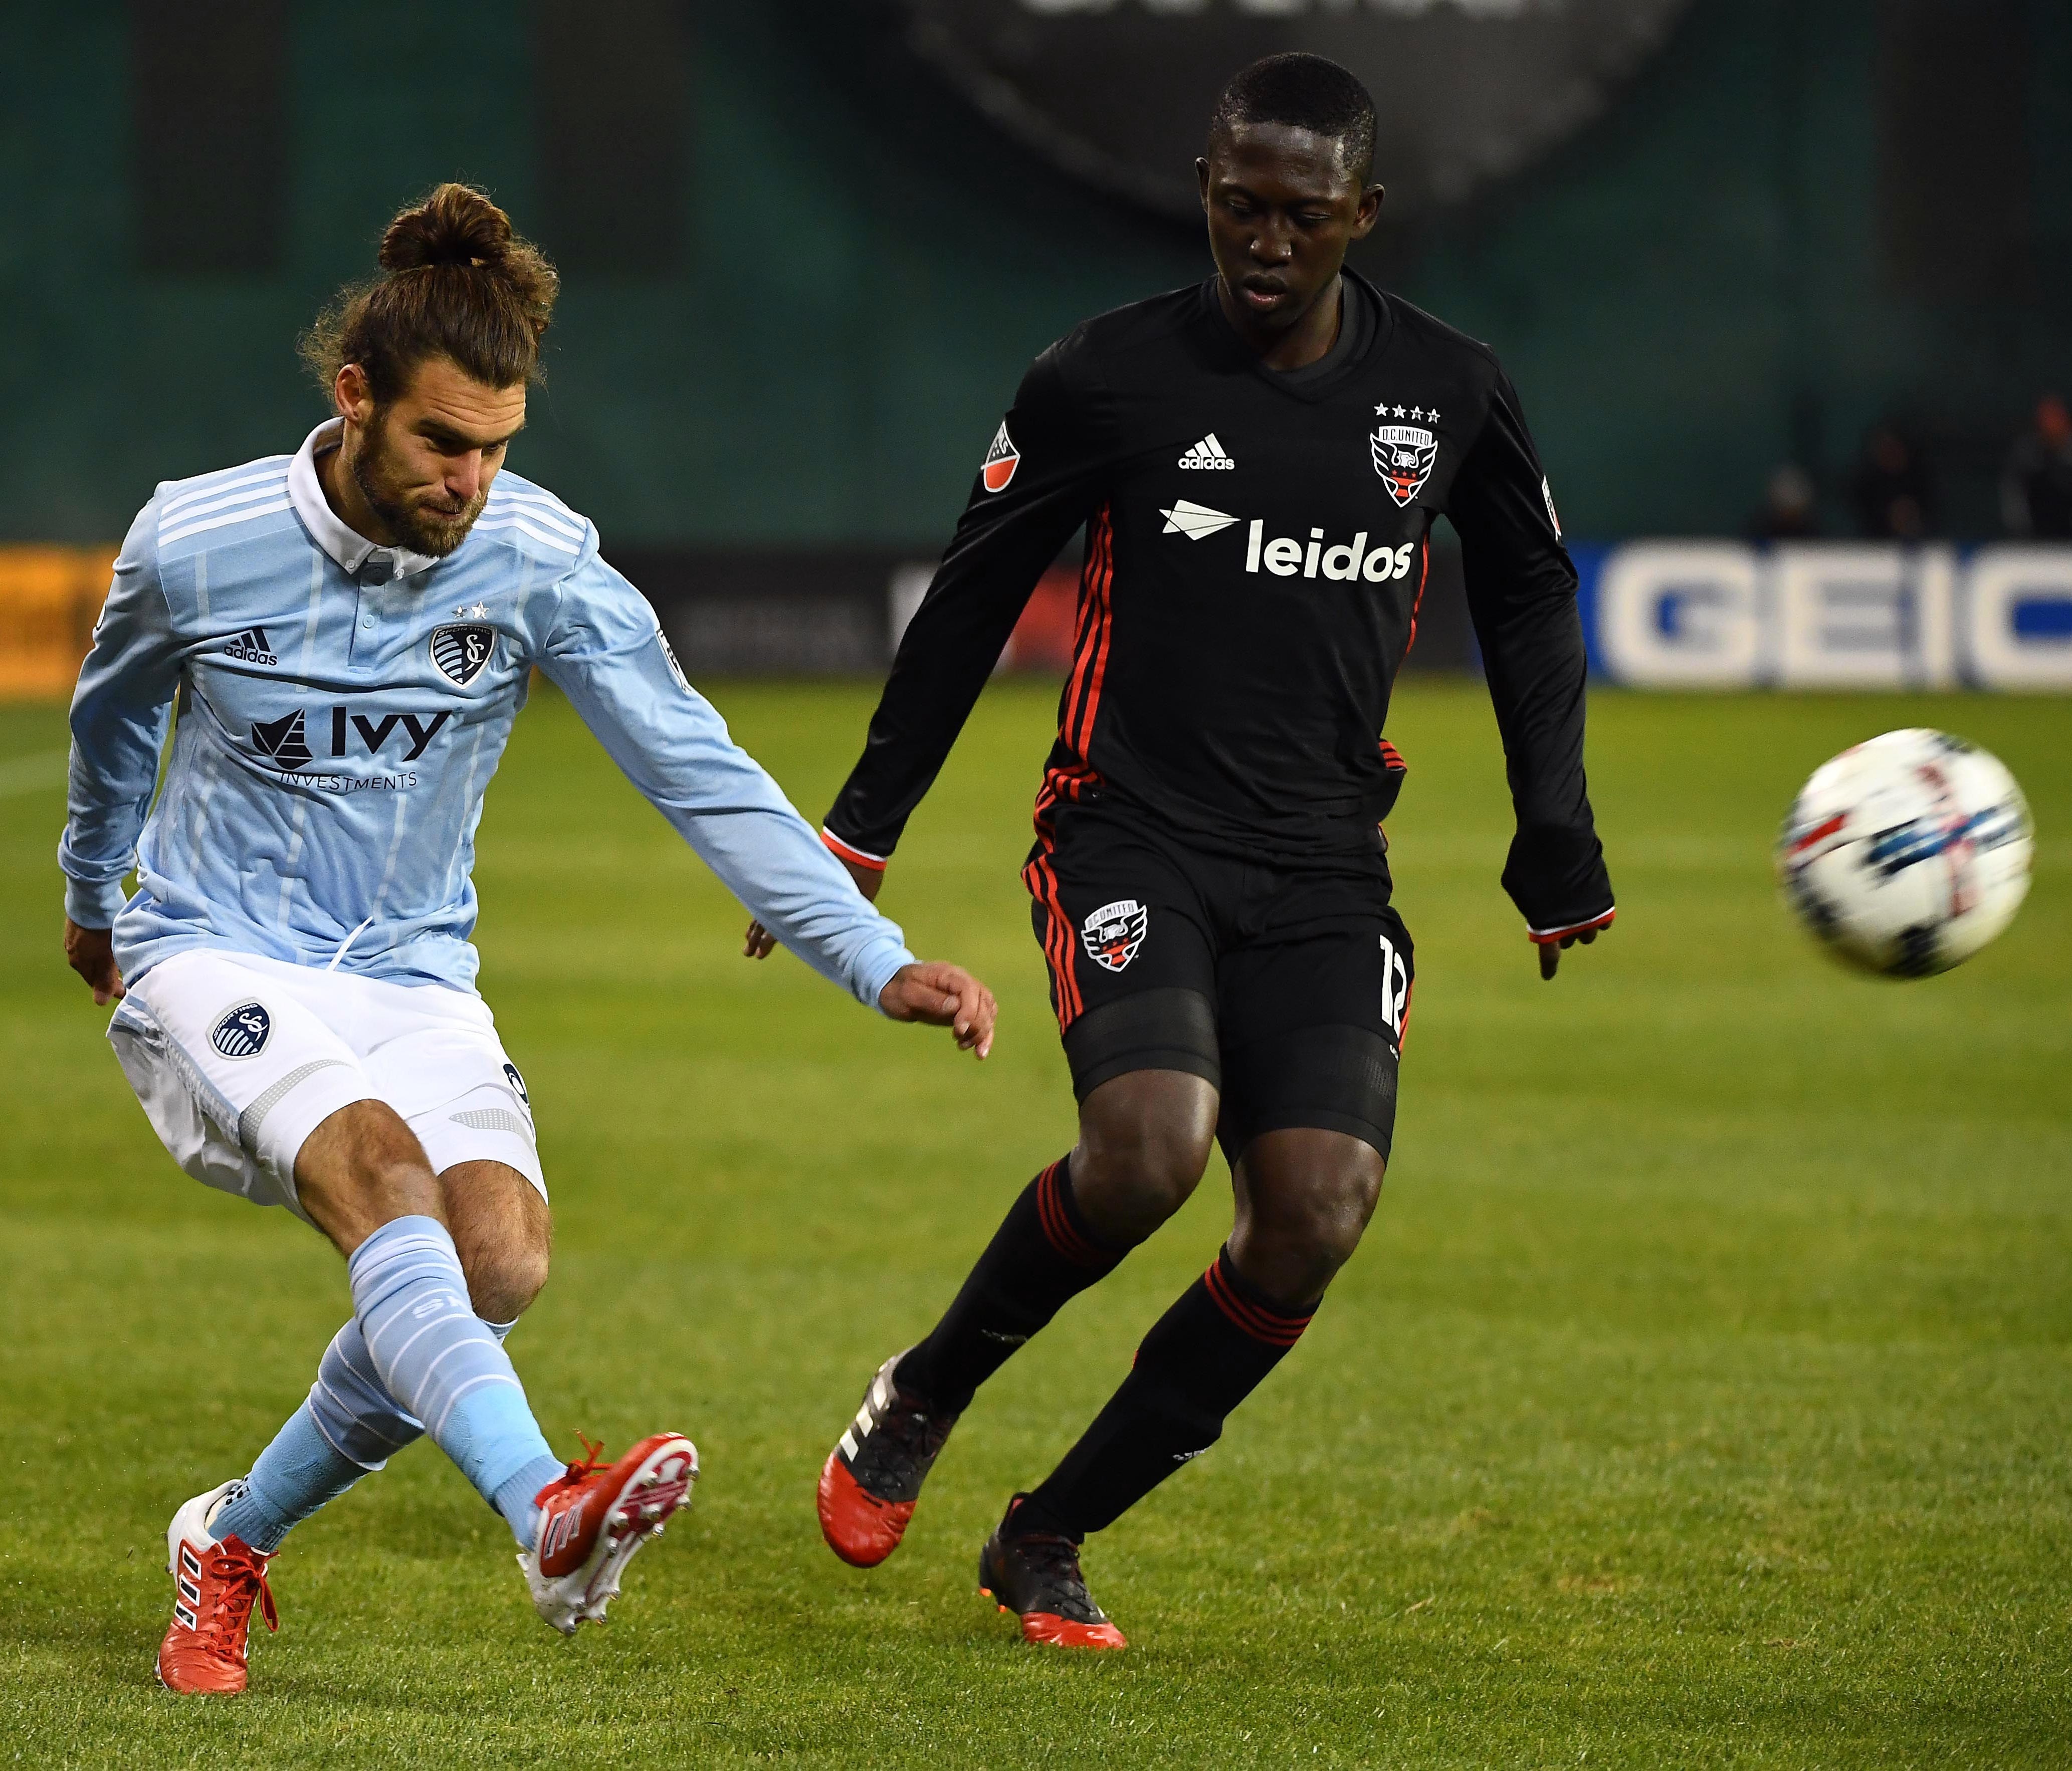 Sporting Kansas City defender Graham Zusi (8) centers the ball as D.C. United forward Patrick Nyarko (12) looks on during the first half at Robert F. Kennedy Memorial Stadium in Washington, D.C., on Mar 4, 2017.